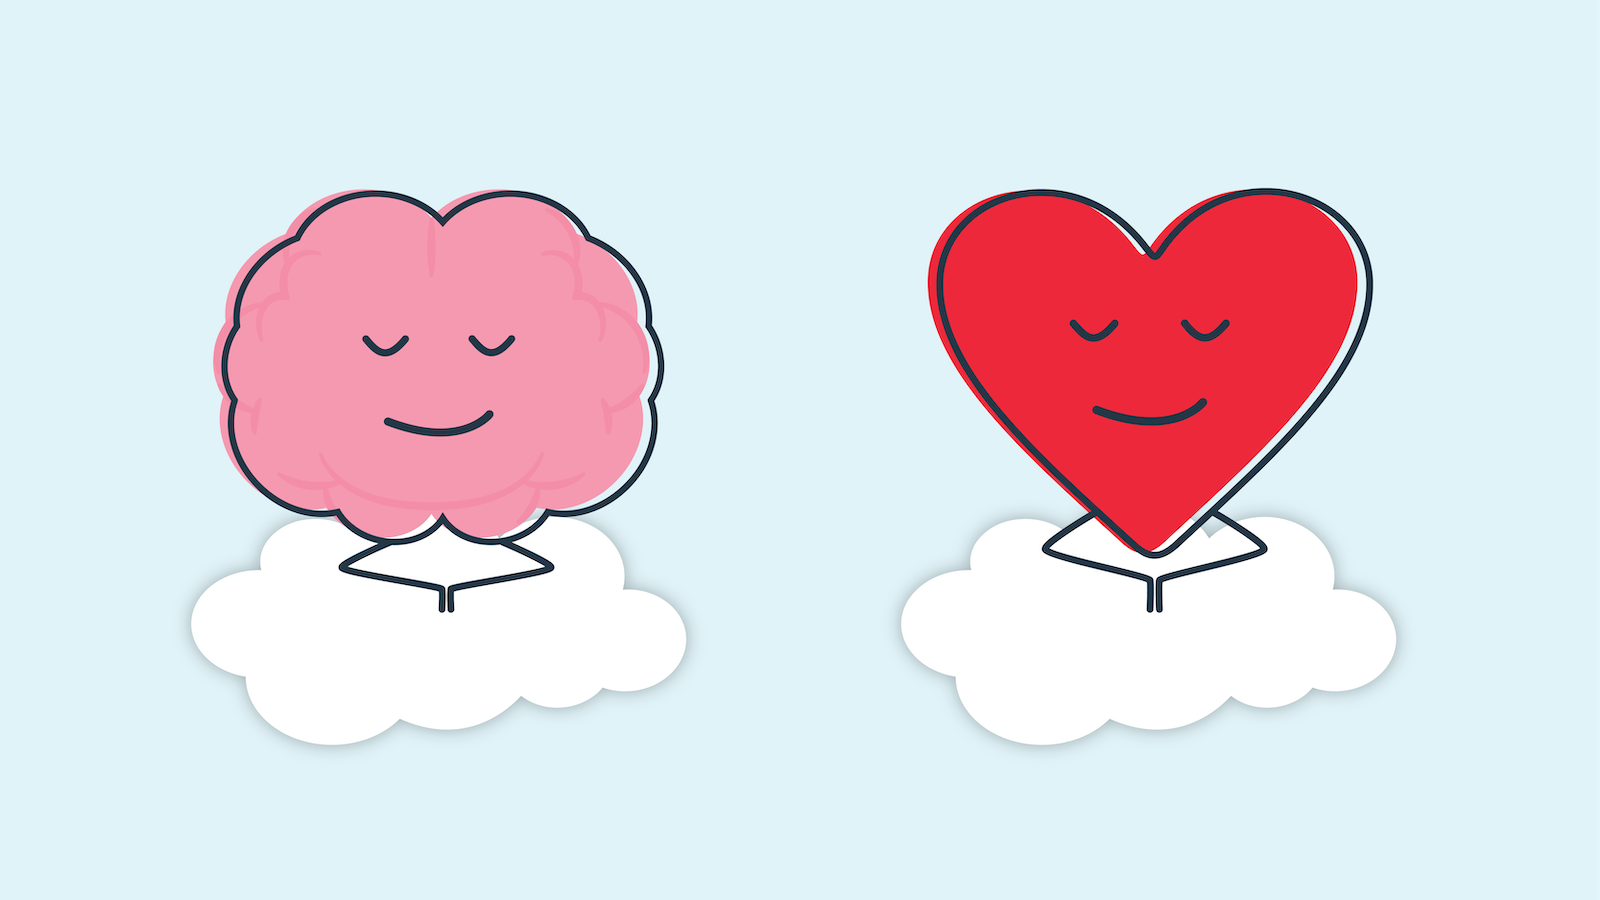 Illustration of a brain and heart icon with little arms meditating over clouds